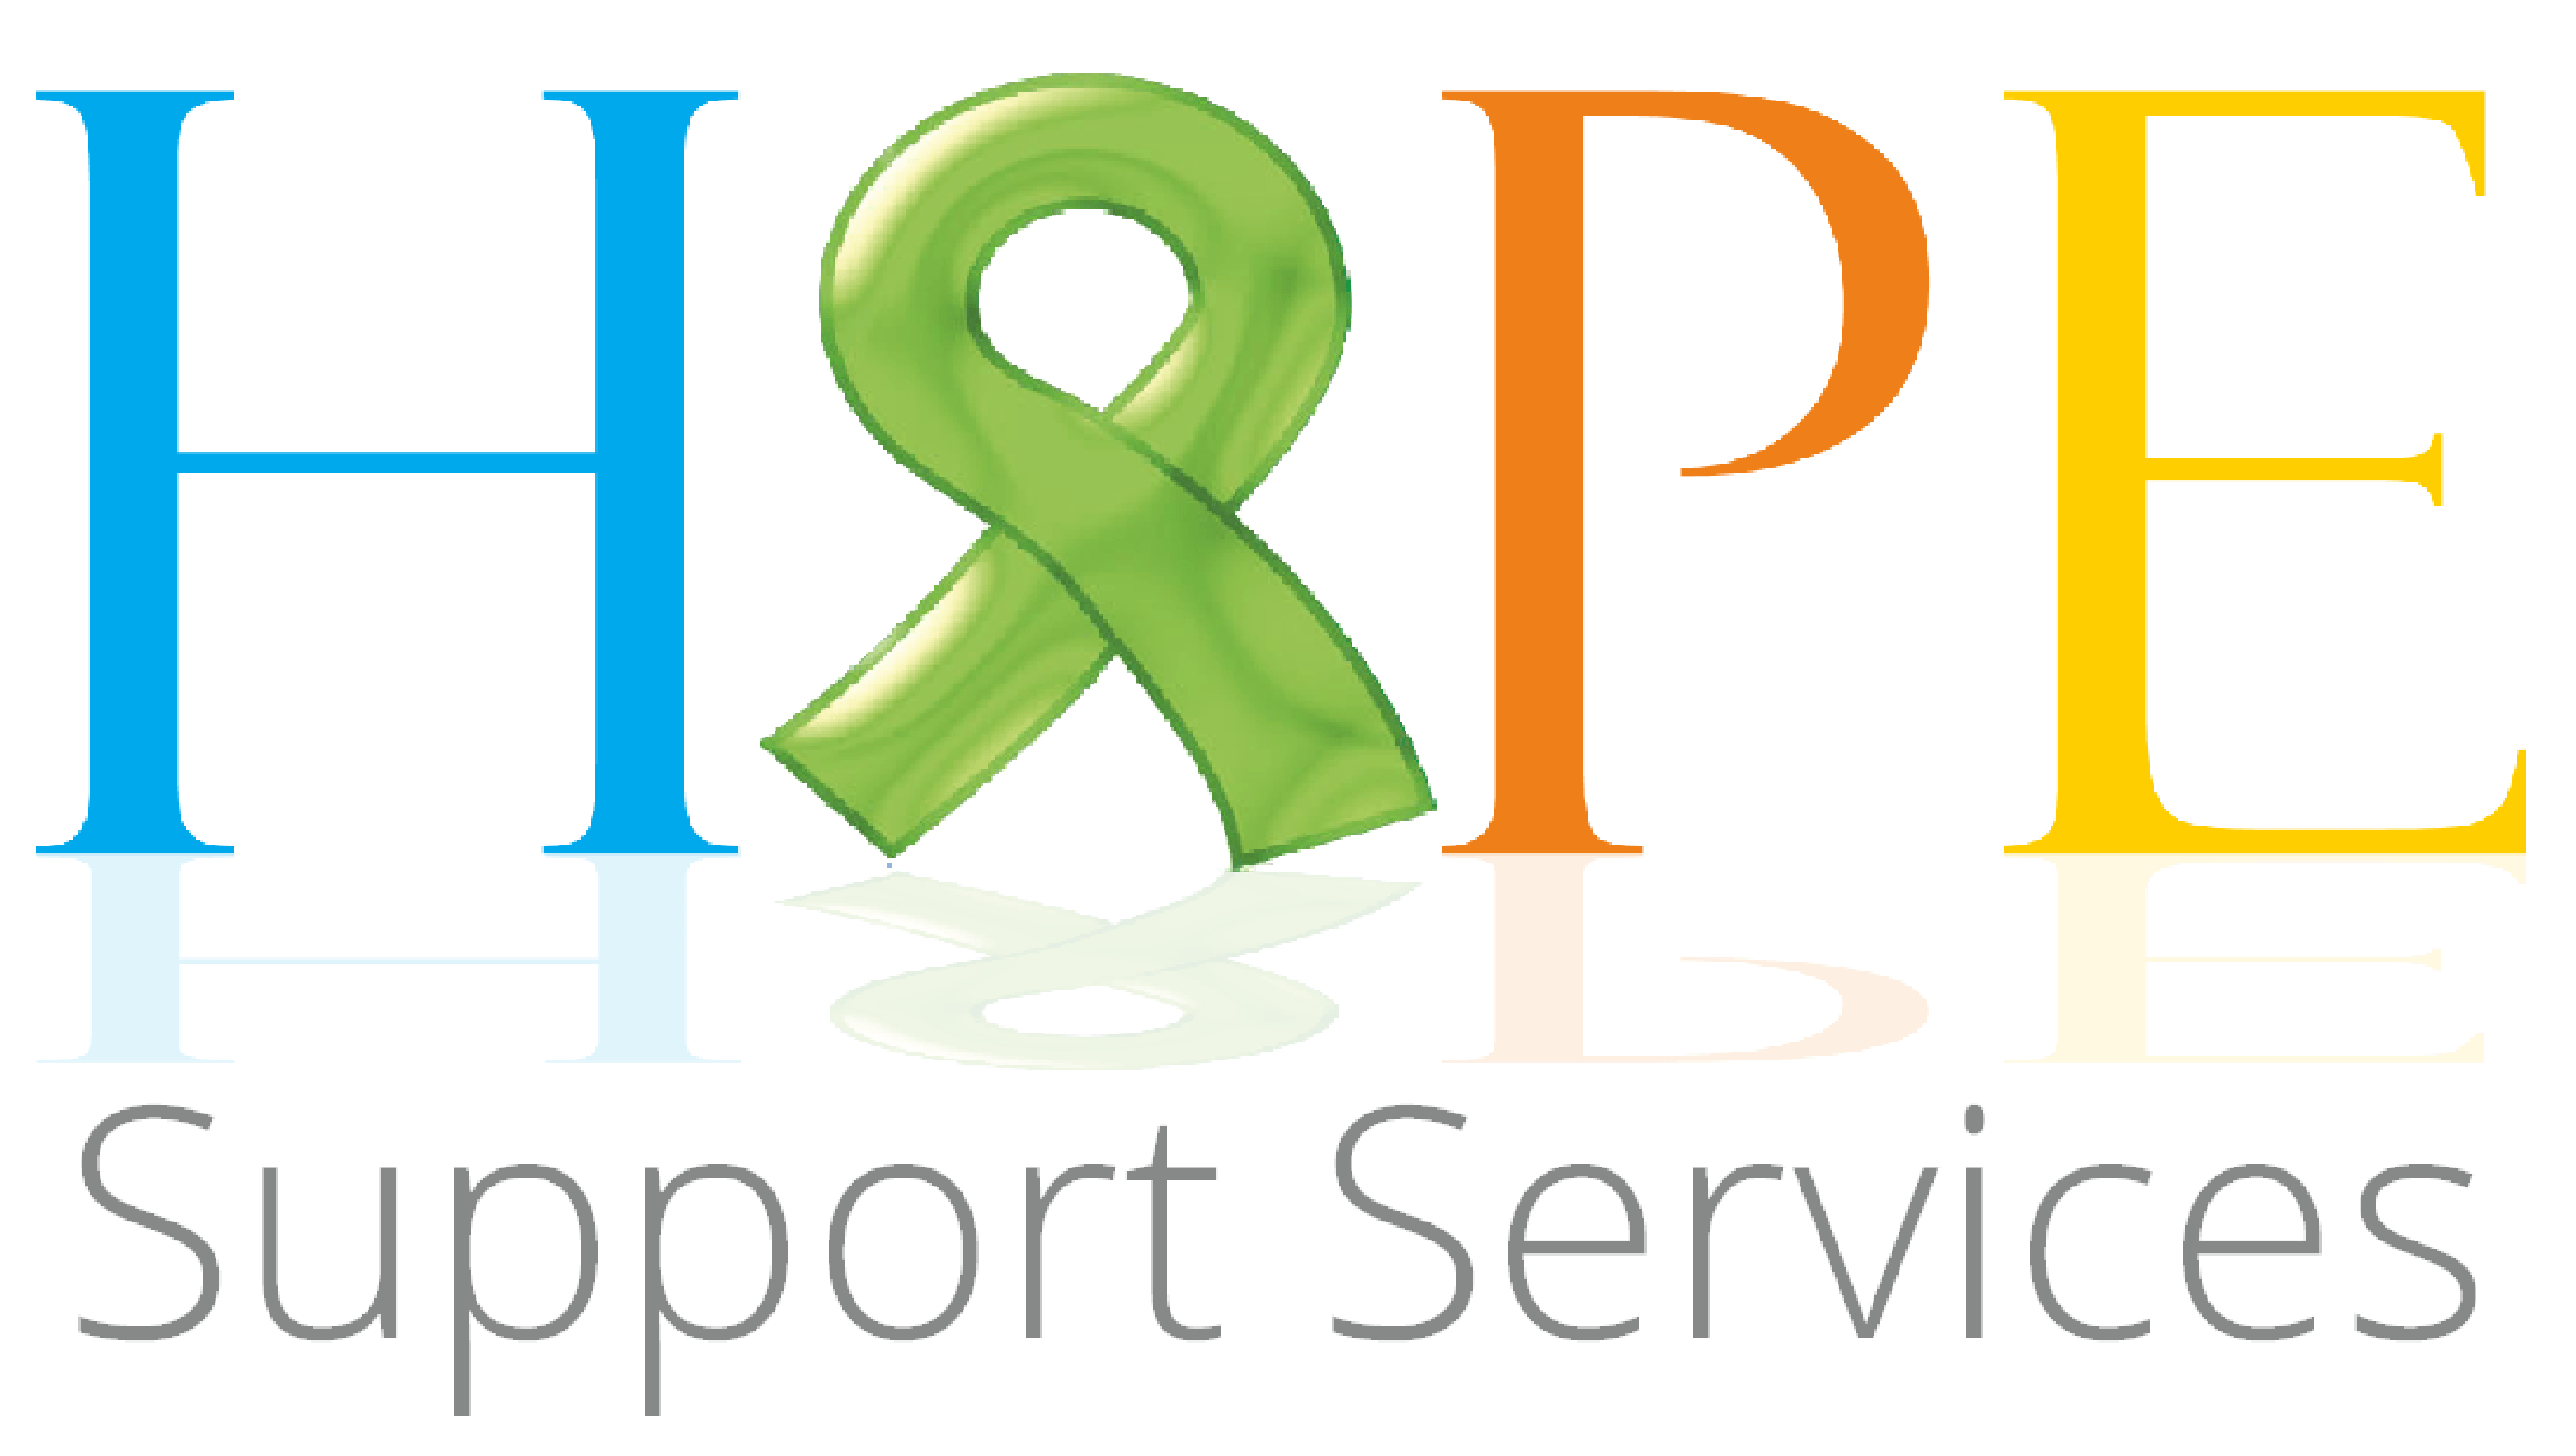 Peoples Telephone Logo - Hope Support Services. The UK charity supporting young people going